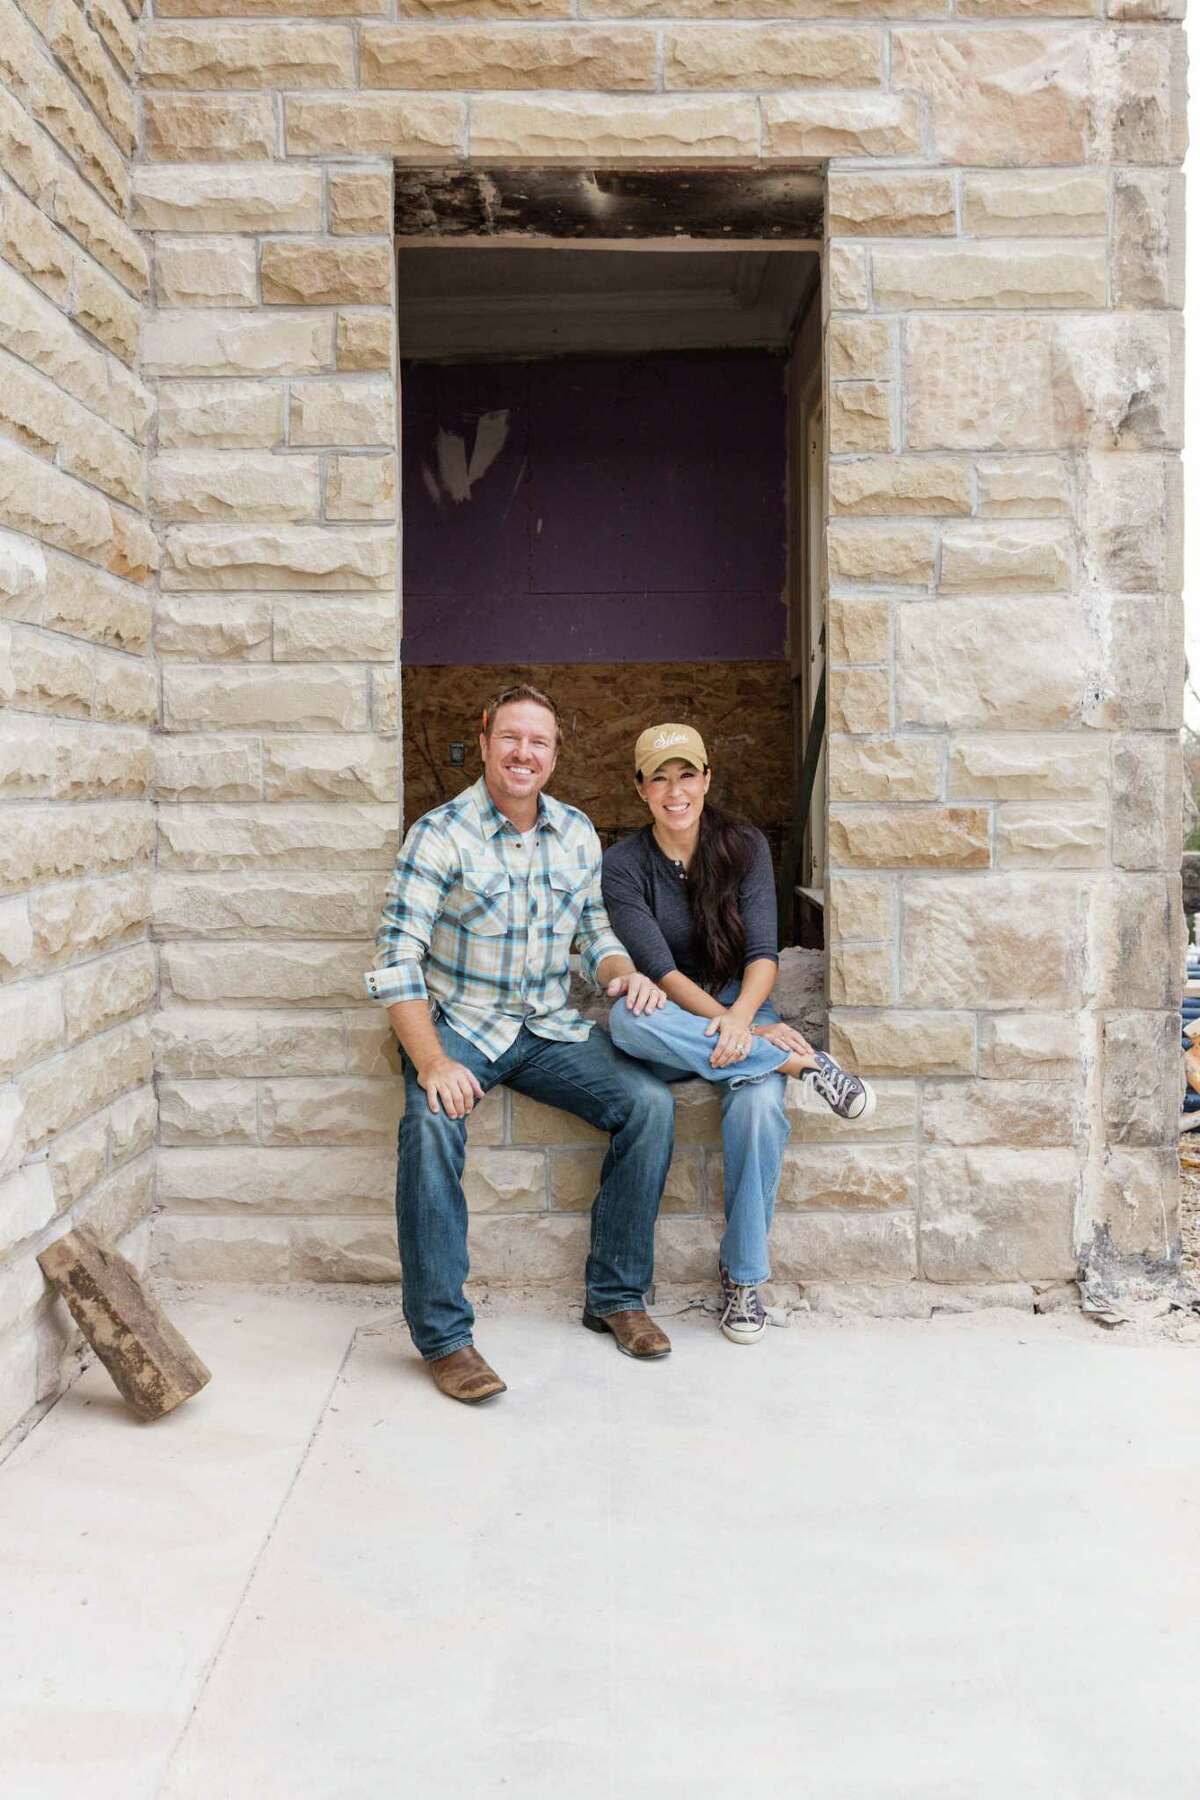 Chip and Jo Renovate a Historic Texas Castle : To give this historic landmark new life, the couple must first tackle the challenging infrastructure while preserving its historic features.